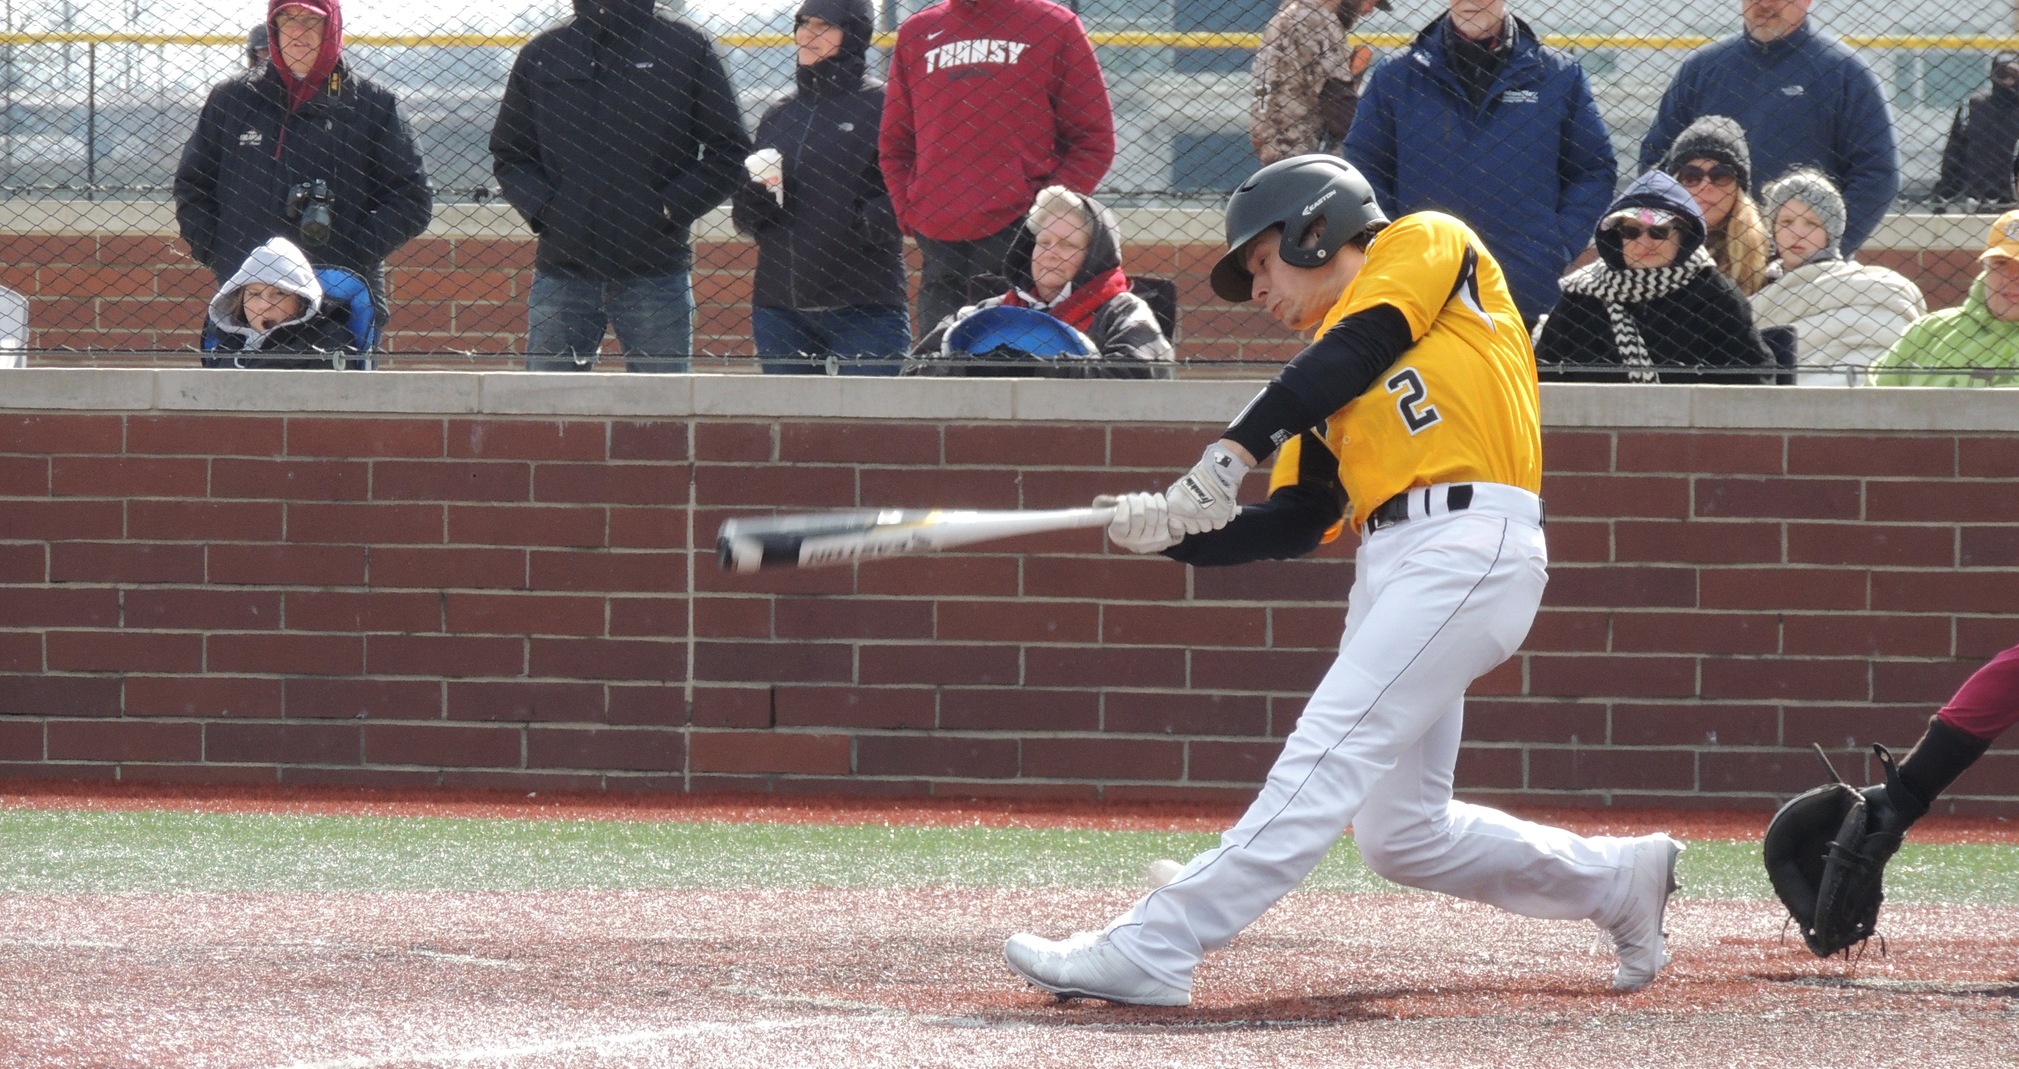 Dylan Ott had three hits against the Pioneers, including his second home run of the season.